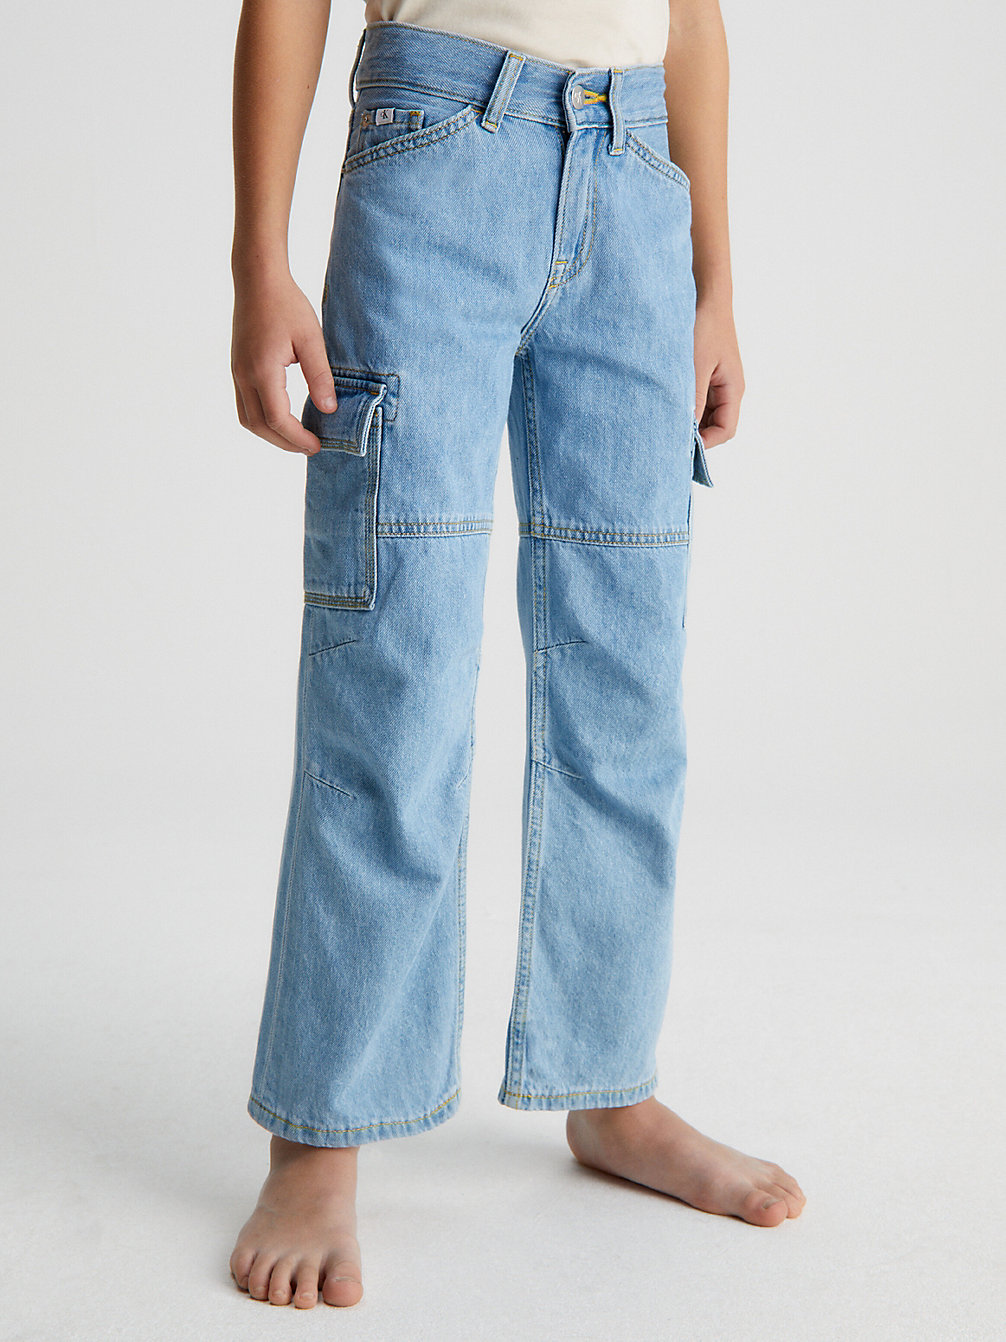 Relaxed Jeans Skater > UTILITY WASHED BLUE > undefined nino > Calvin Klein